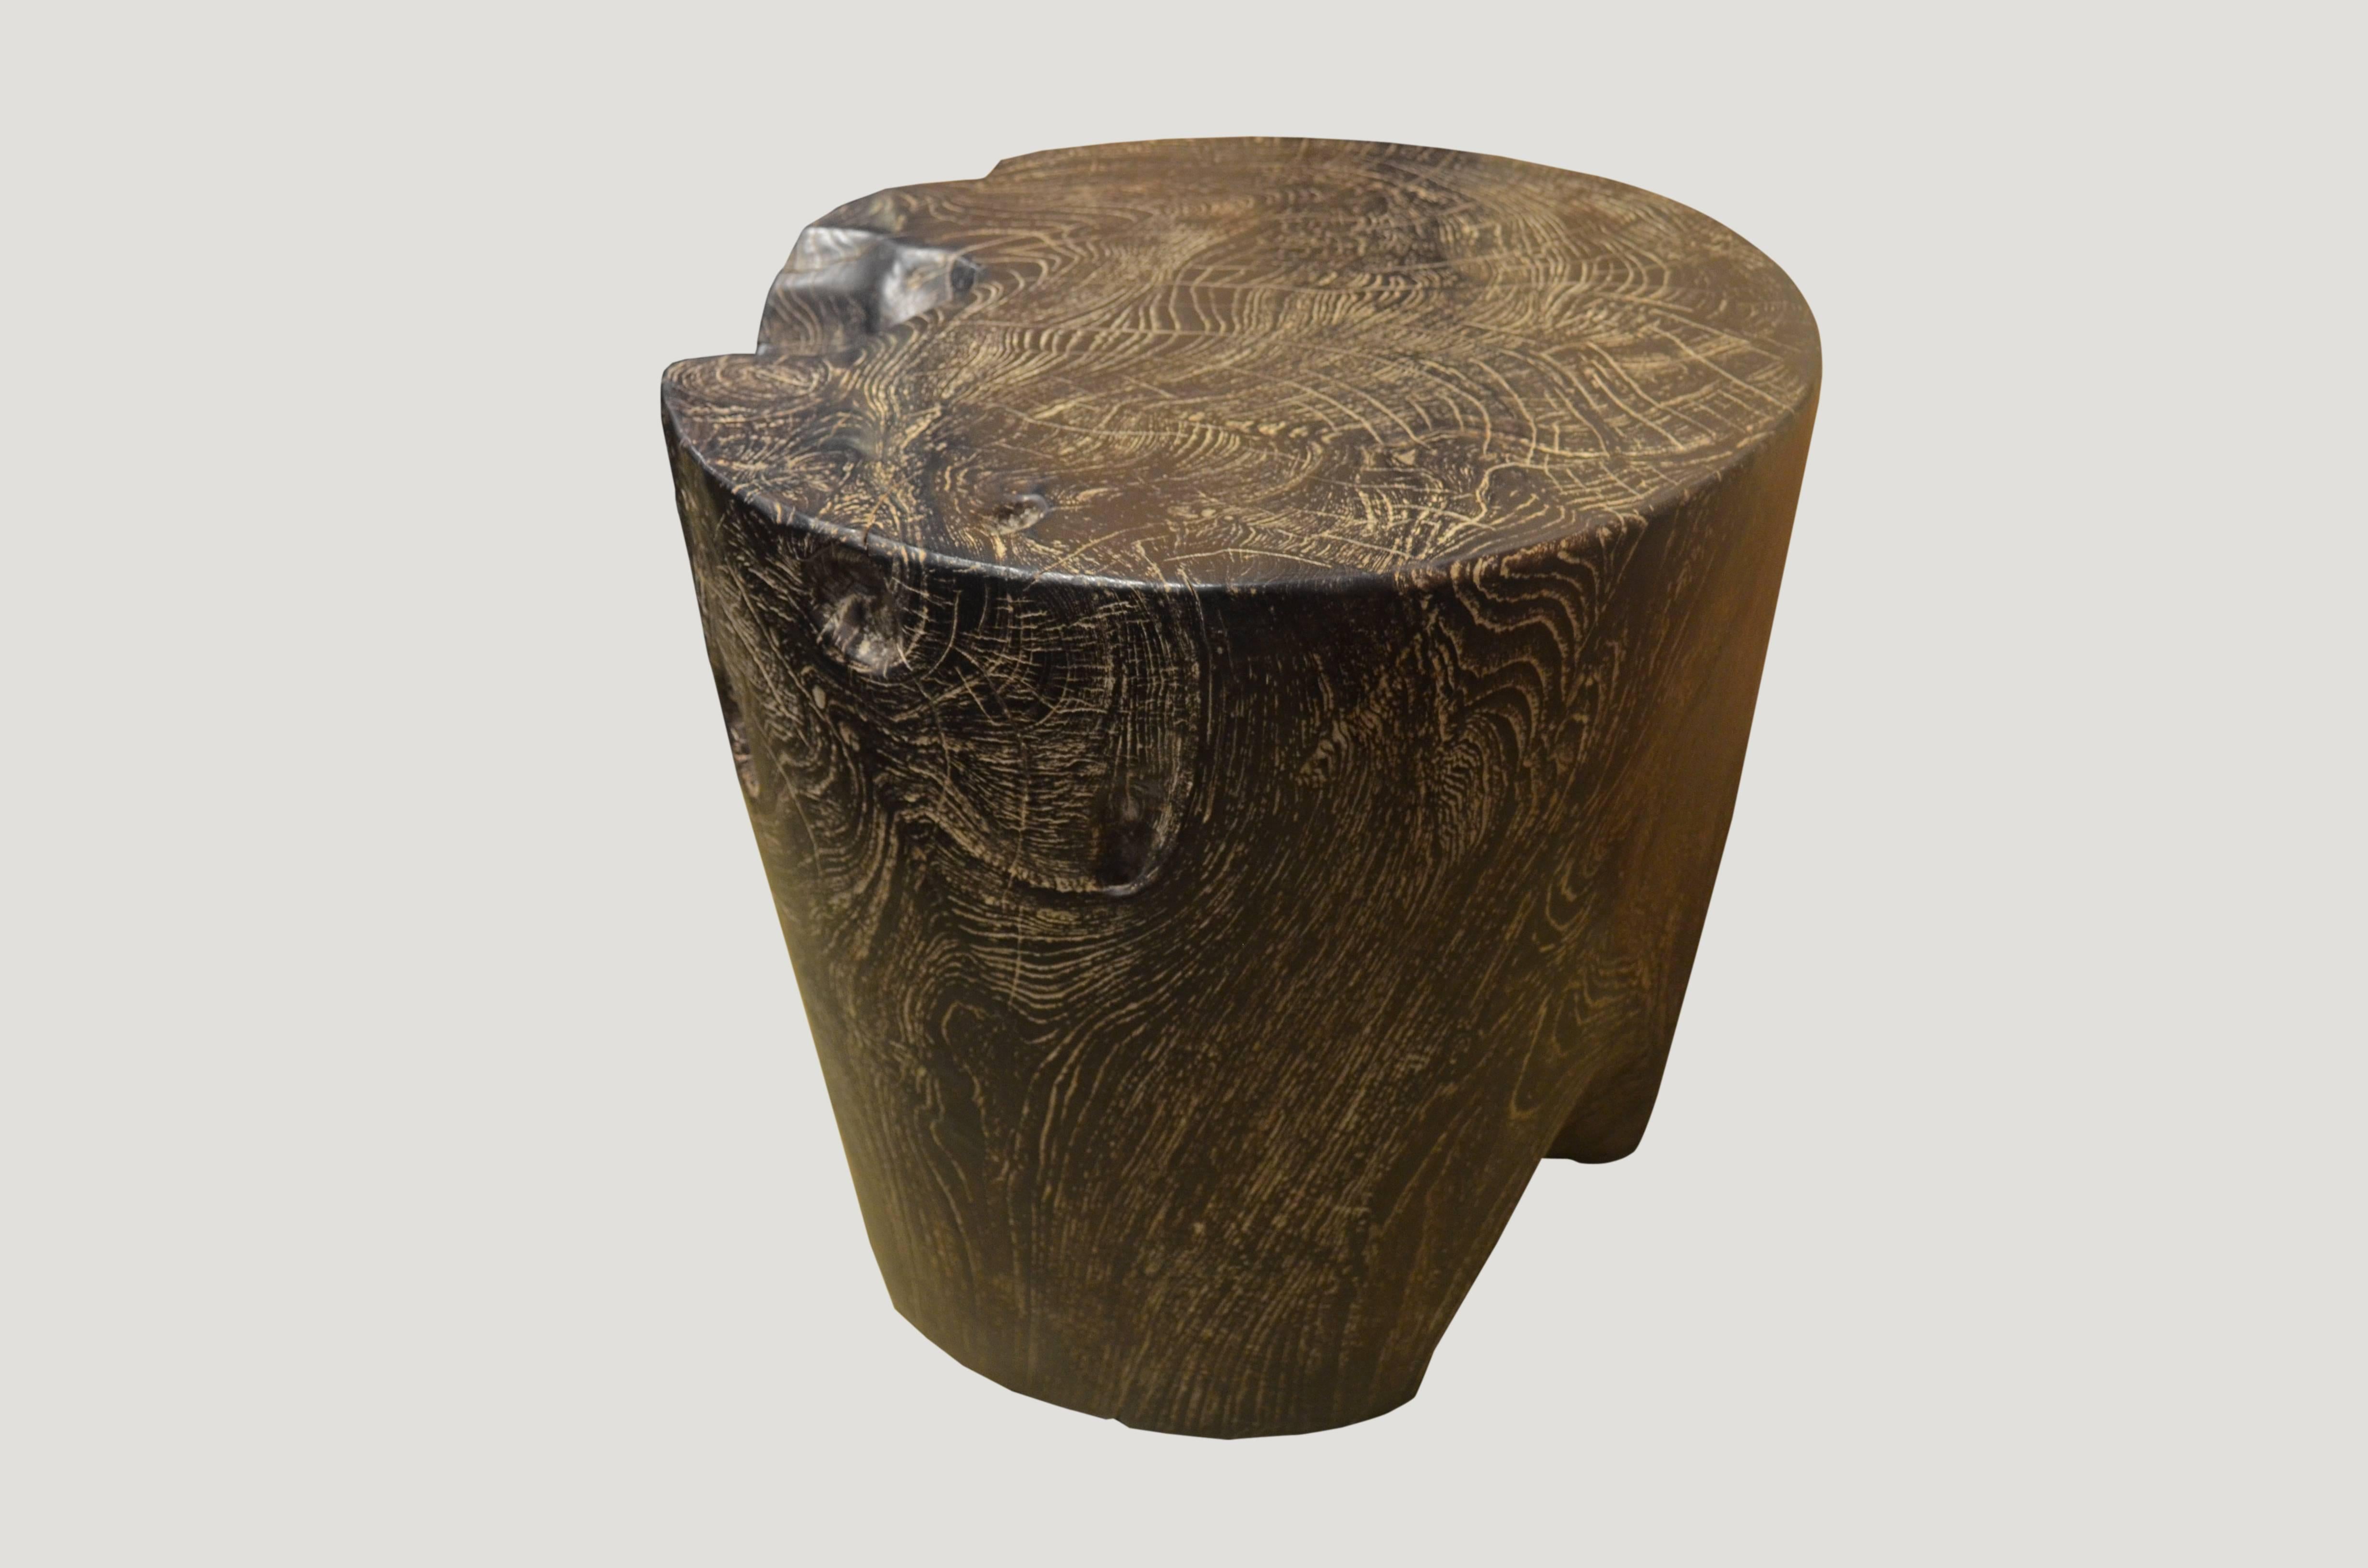 Beautiful side table or stool carved from a single aged reclaimed teak root.